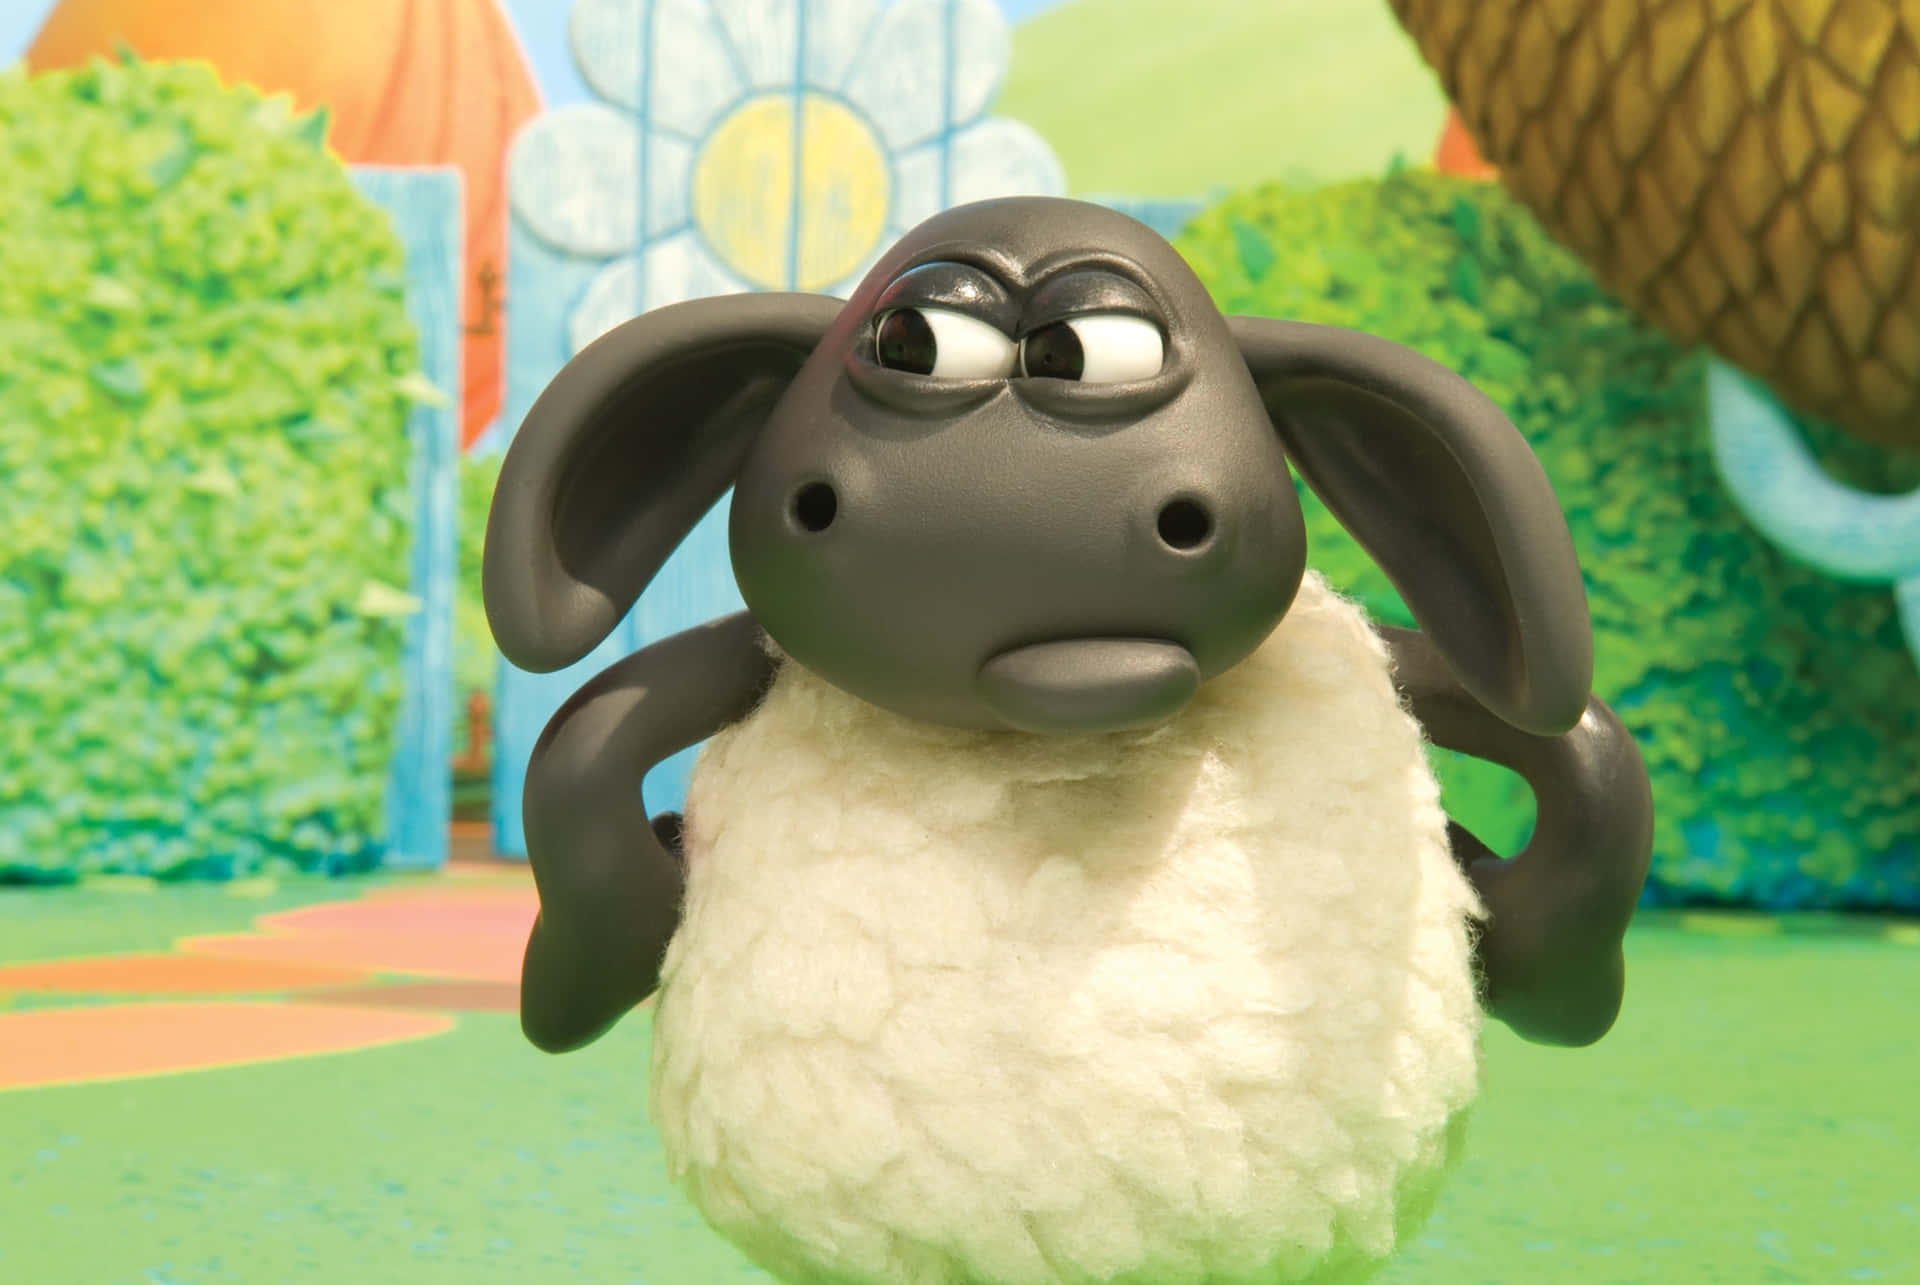 Animated Sheep With Surprised Expression Wallpaper